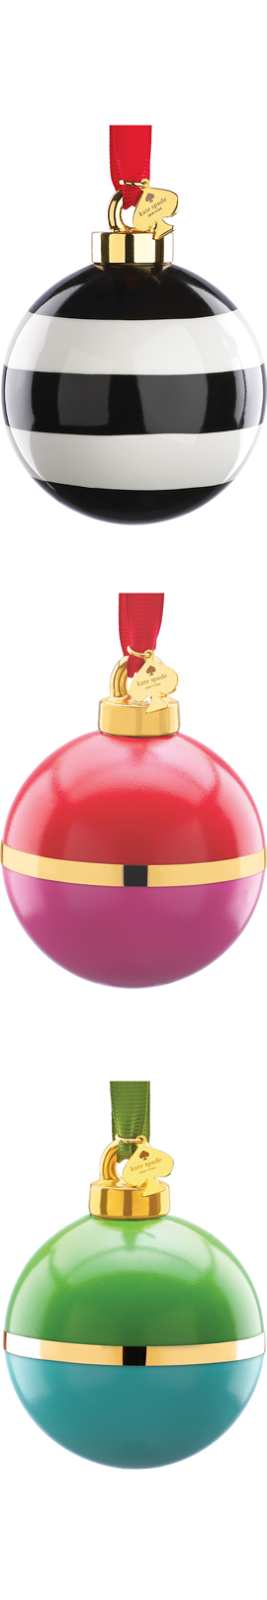 kate spade new york assorted ornaments